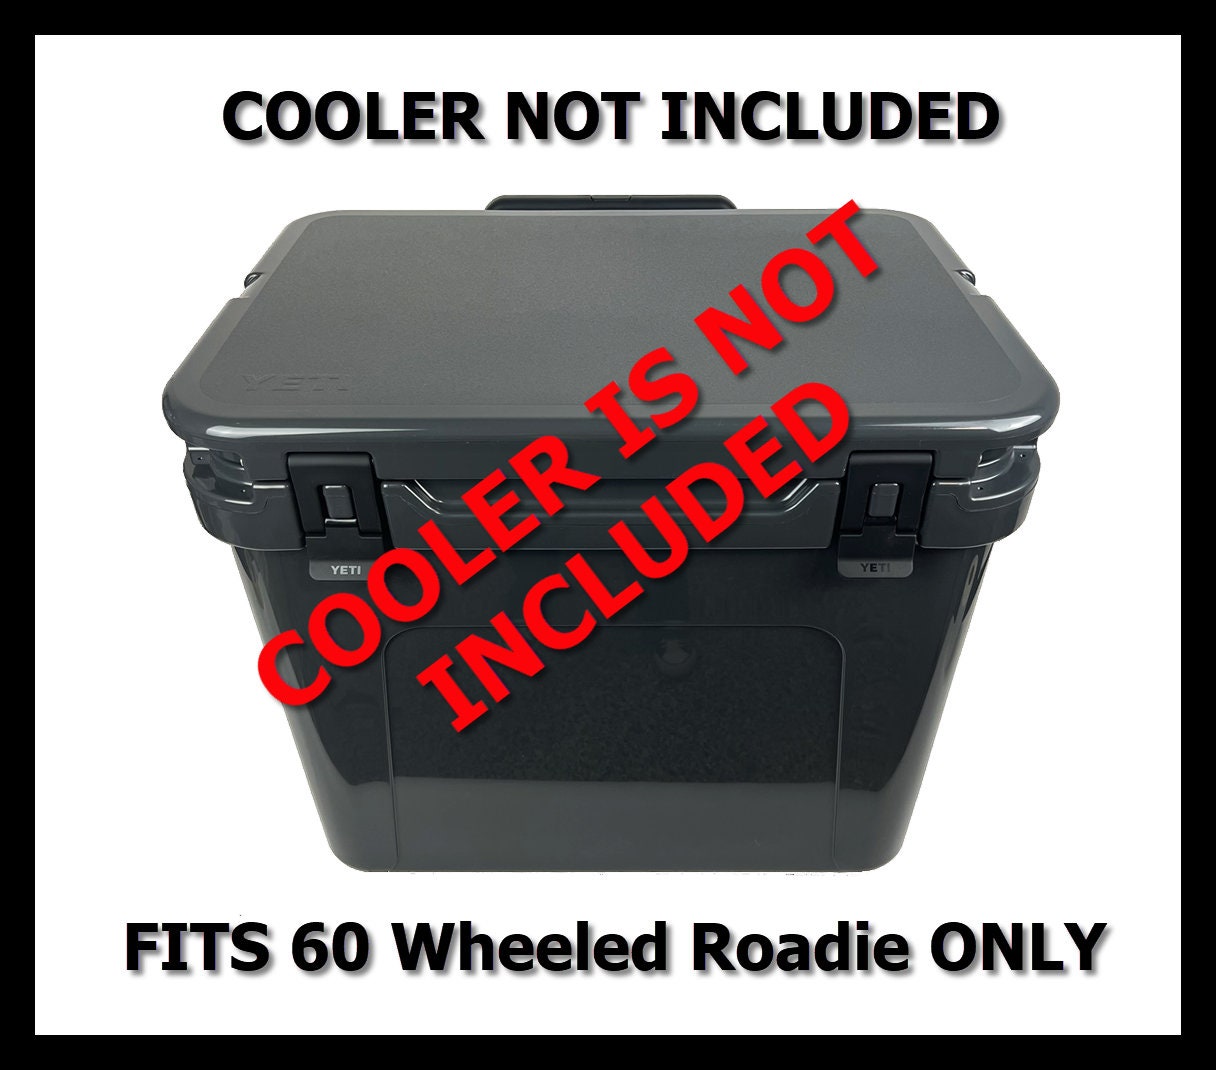 Cooler Pad Top Cover Fits YETI Roadie 60 cooler is Not 